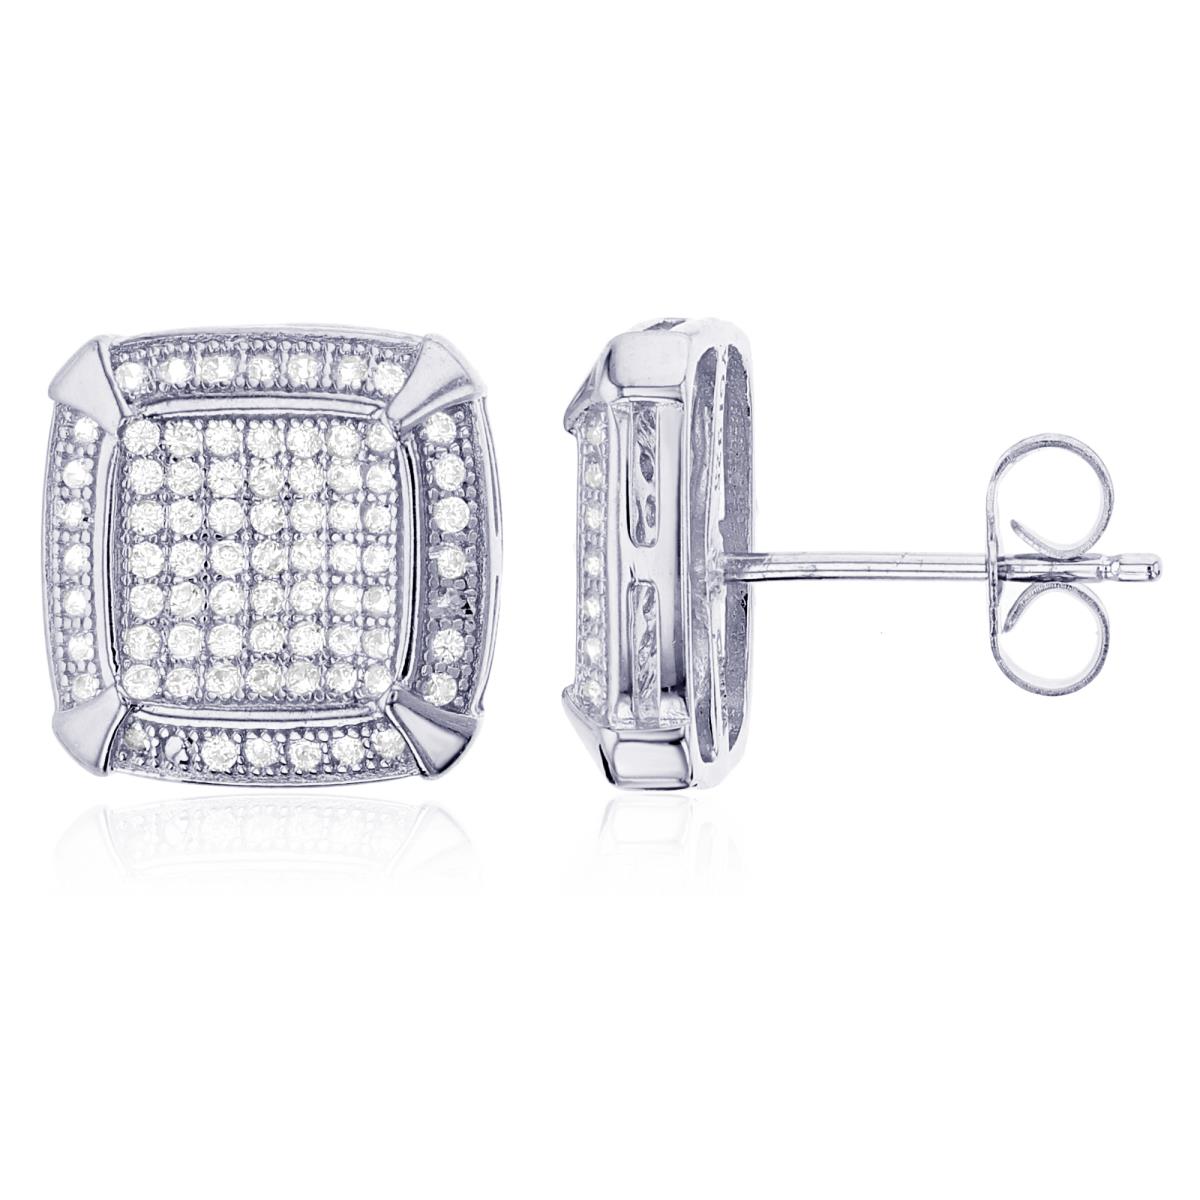 Sterling Silver Micropave 12x12mm Square Stud Earring